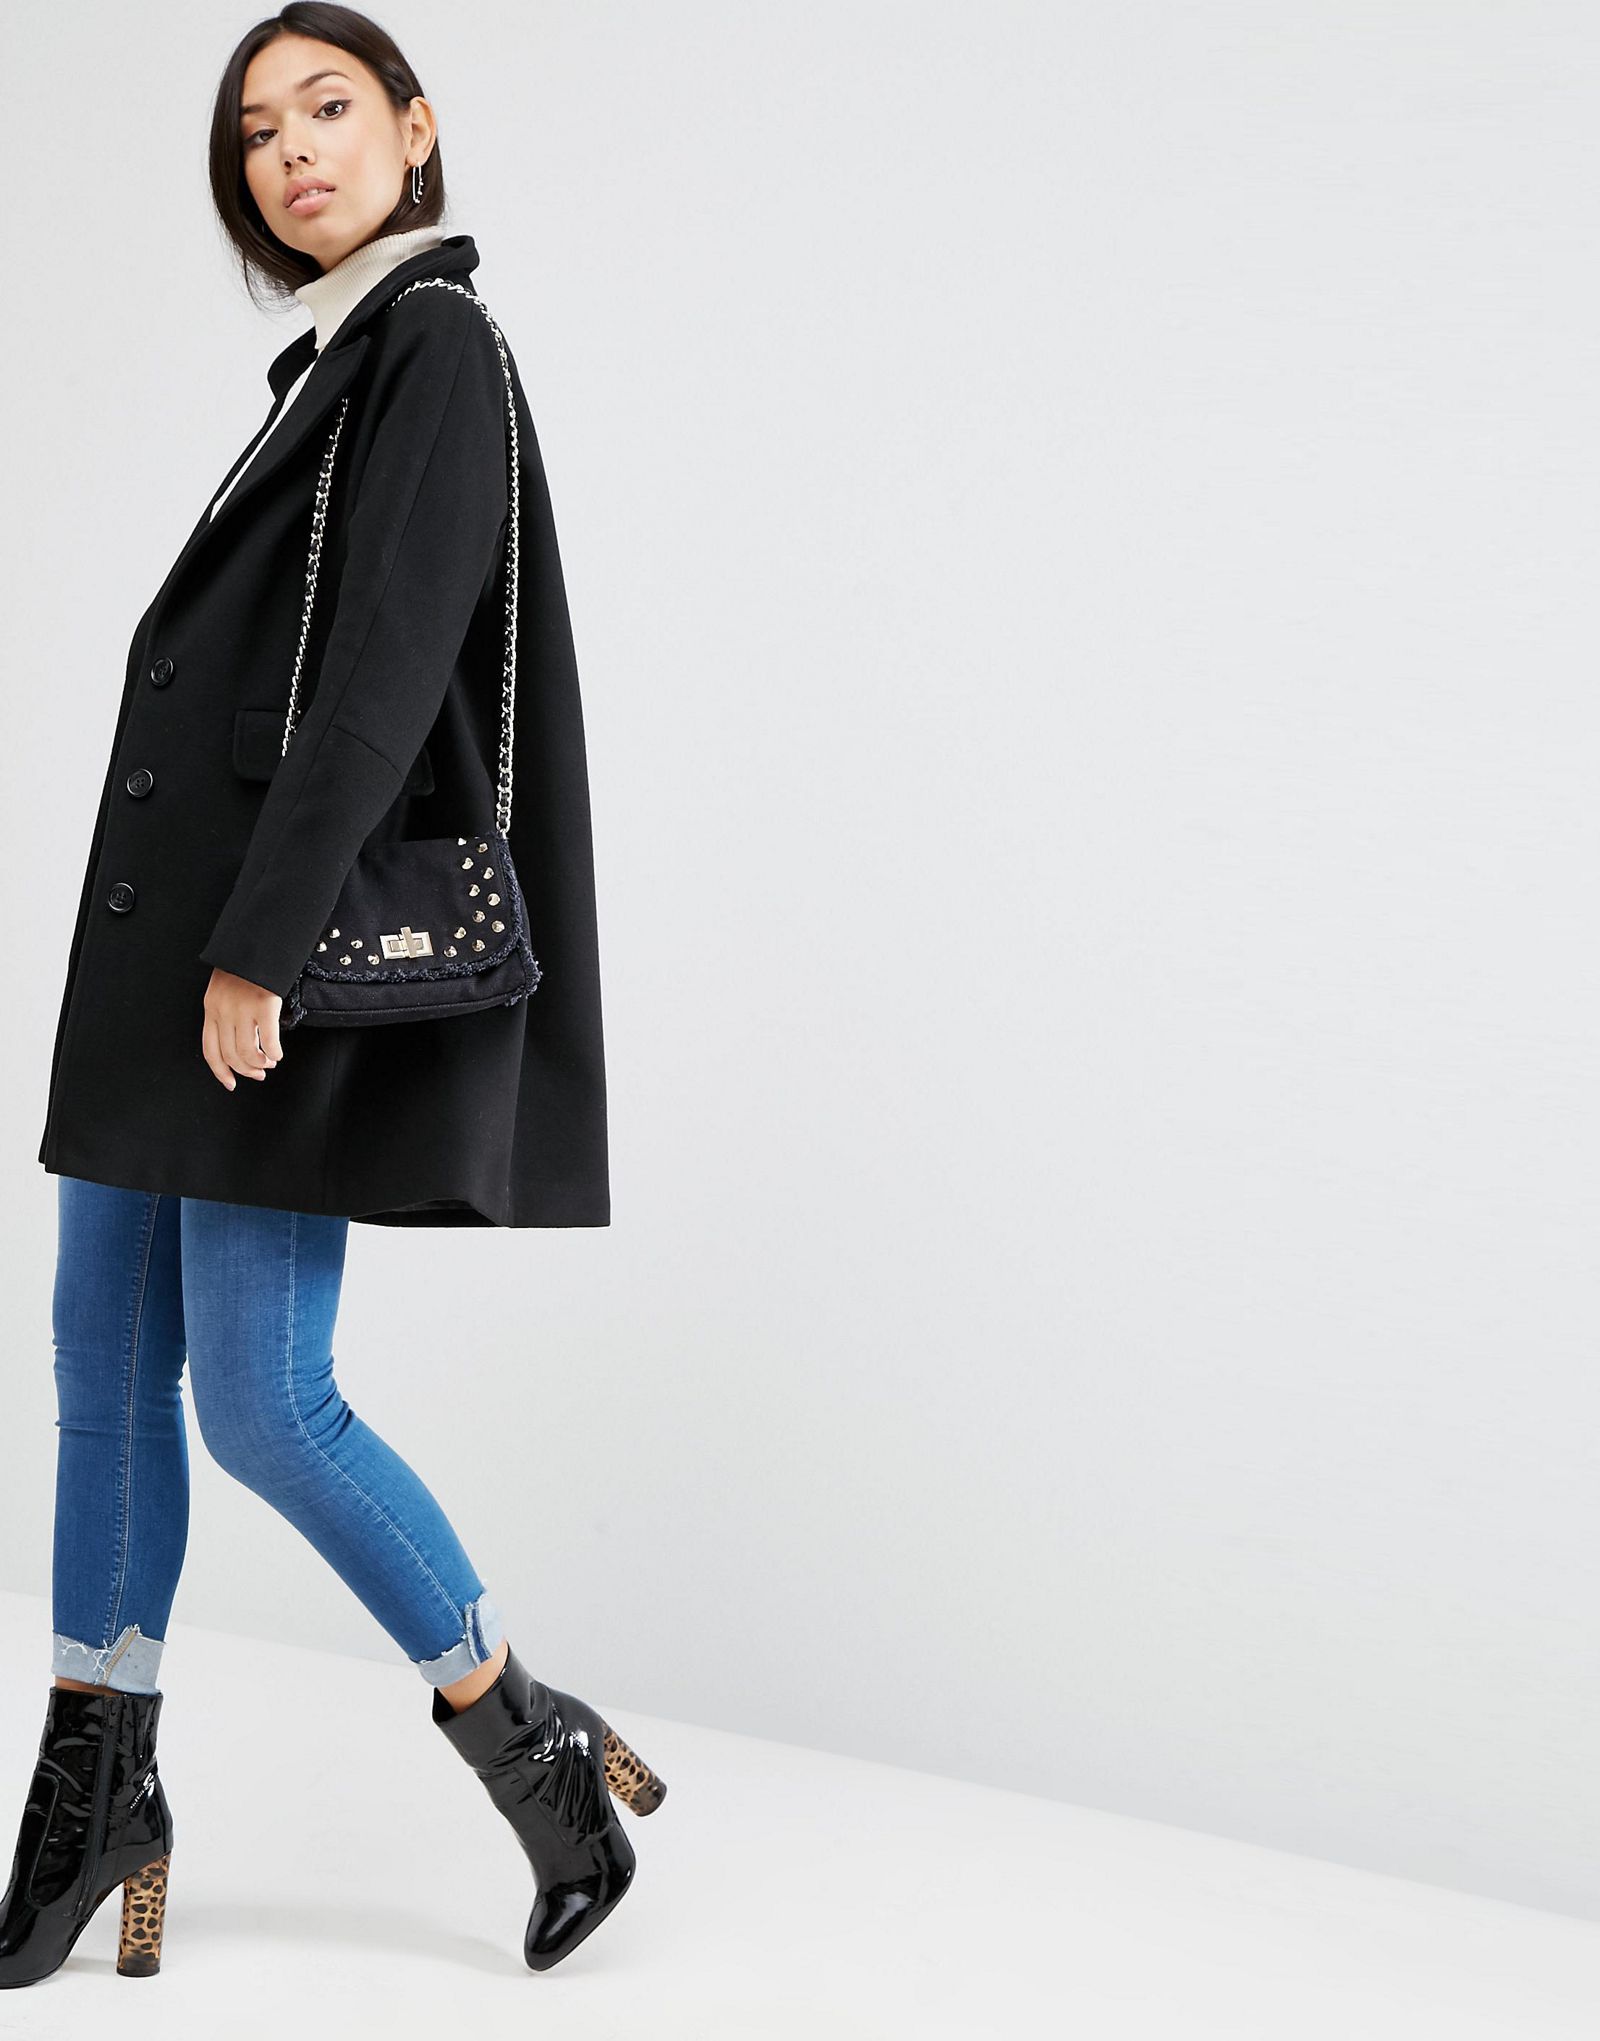 ASOS Coat with Batwing Sleeve and Swing Shape